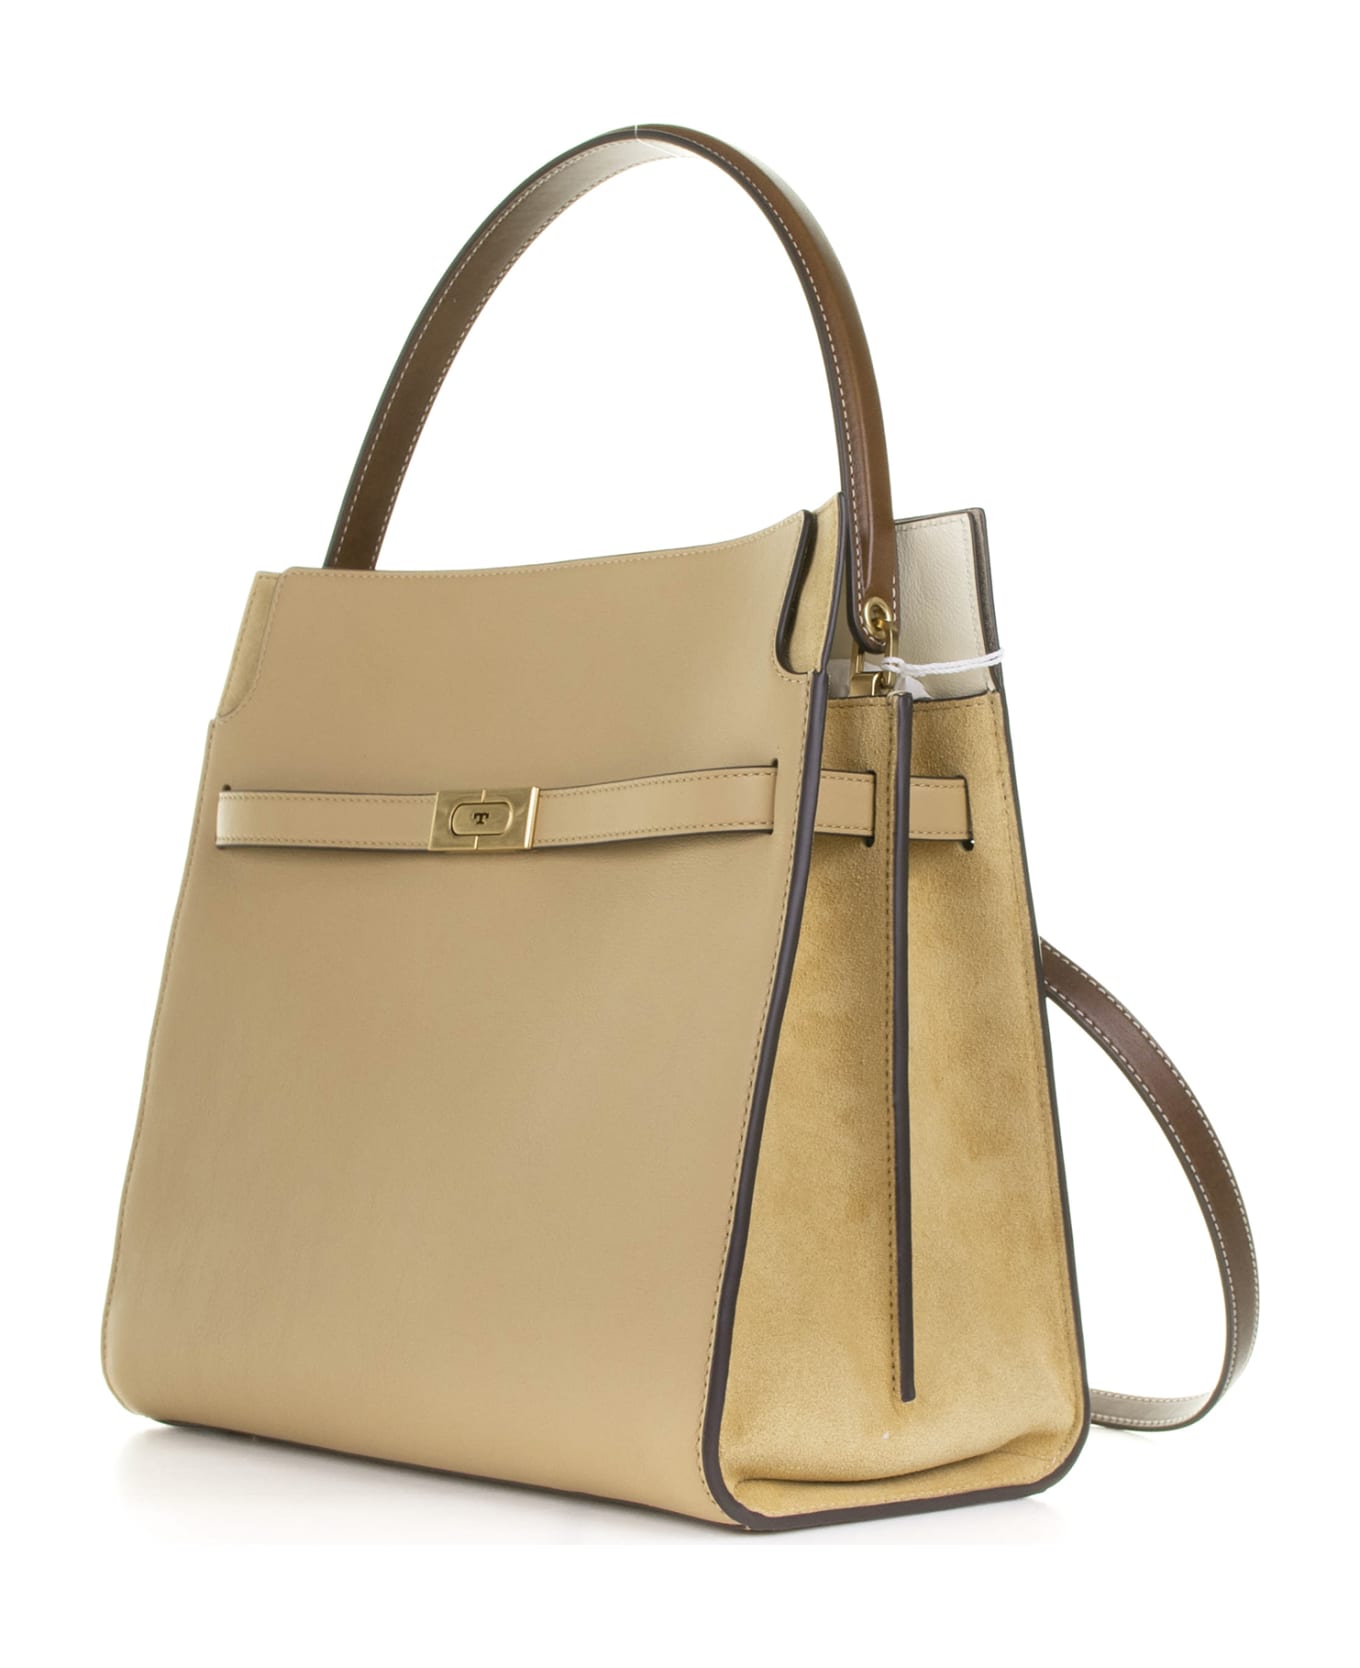 Tory Burch Double Lee Radziwill Bag In Leather - DARK SAND トートバッグ